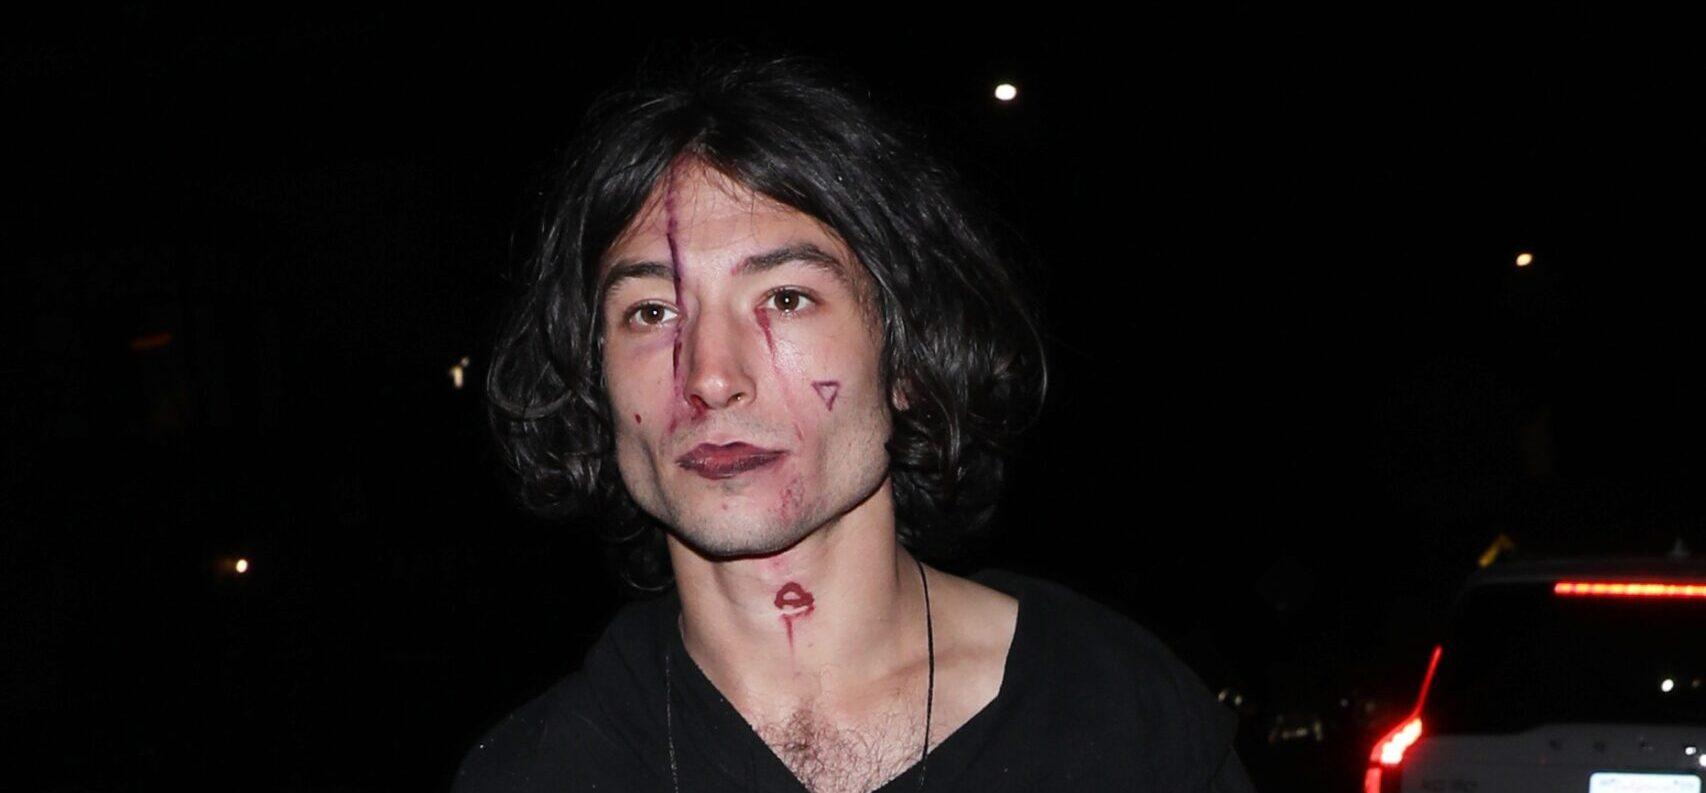 Ezra Miller’s Tarnished Rep Hasn’t Affected The Success Of ‘The Flash’